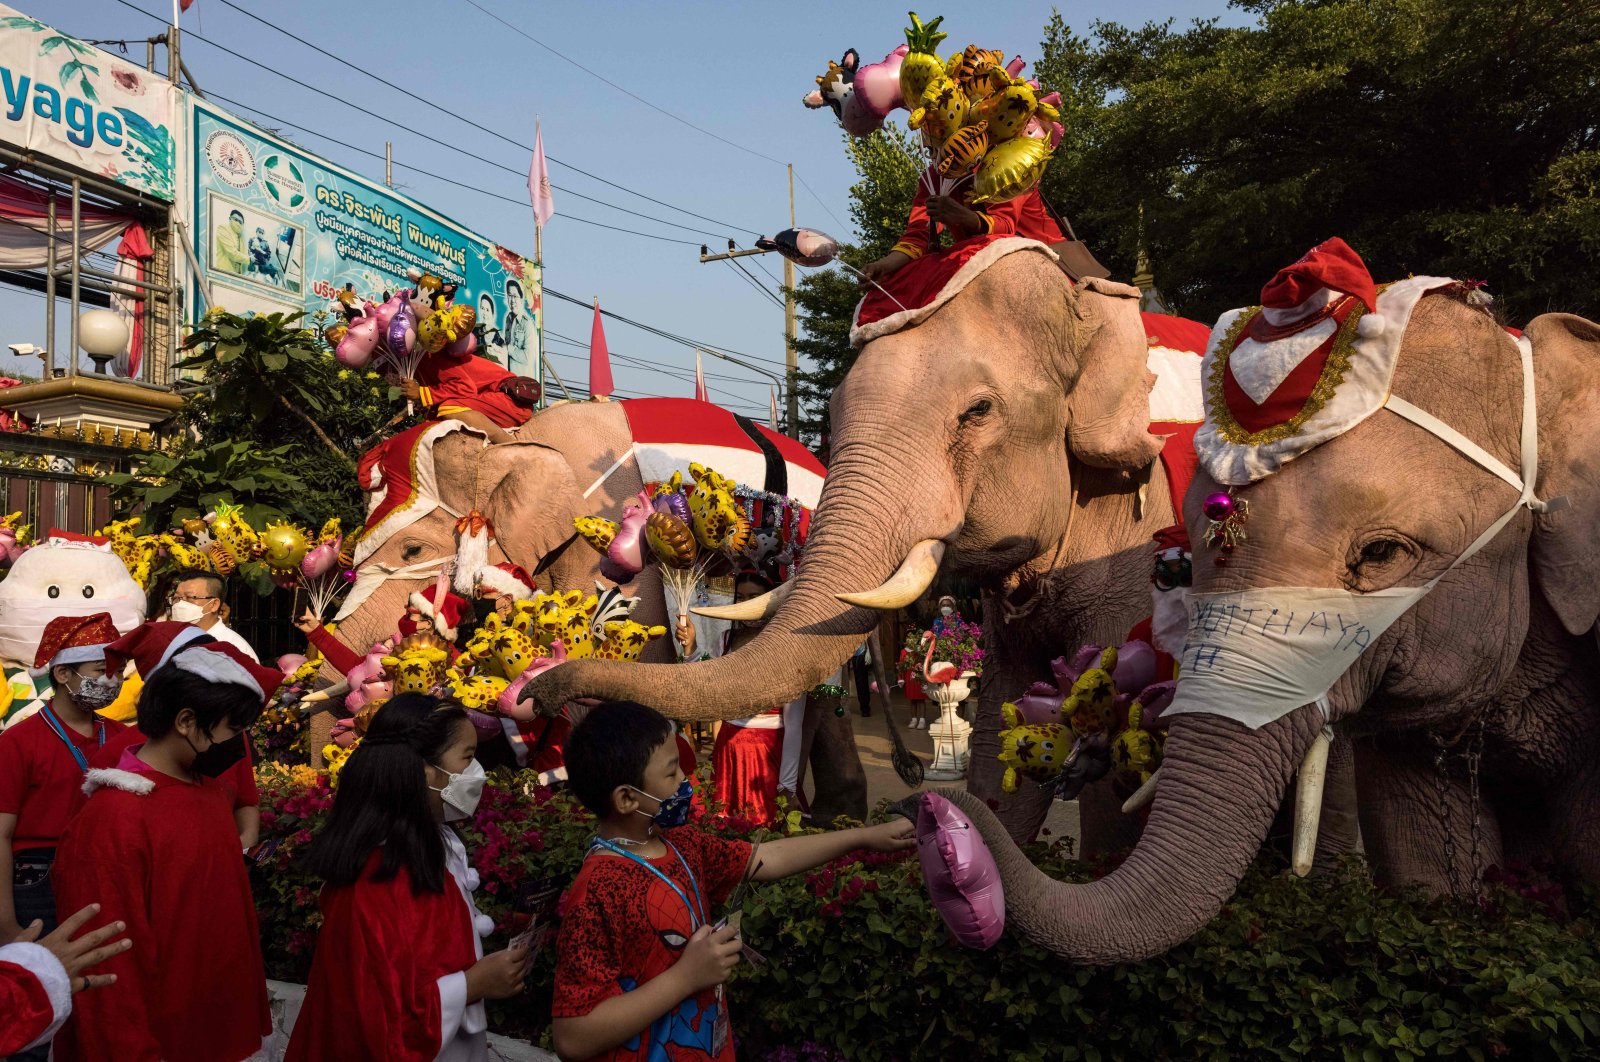 Mahouts and their elephants hand out balloons to children during Christmas celebrations at the Jirasart Witthaya school in Ayutthaya, Thailand, Dec. 24, 2021. (AFP Photo)